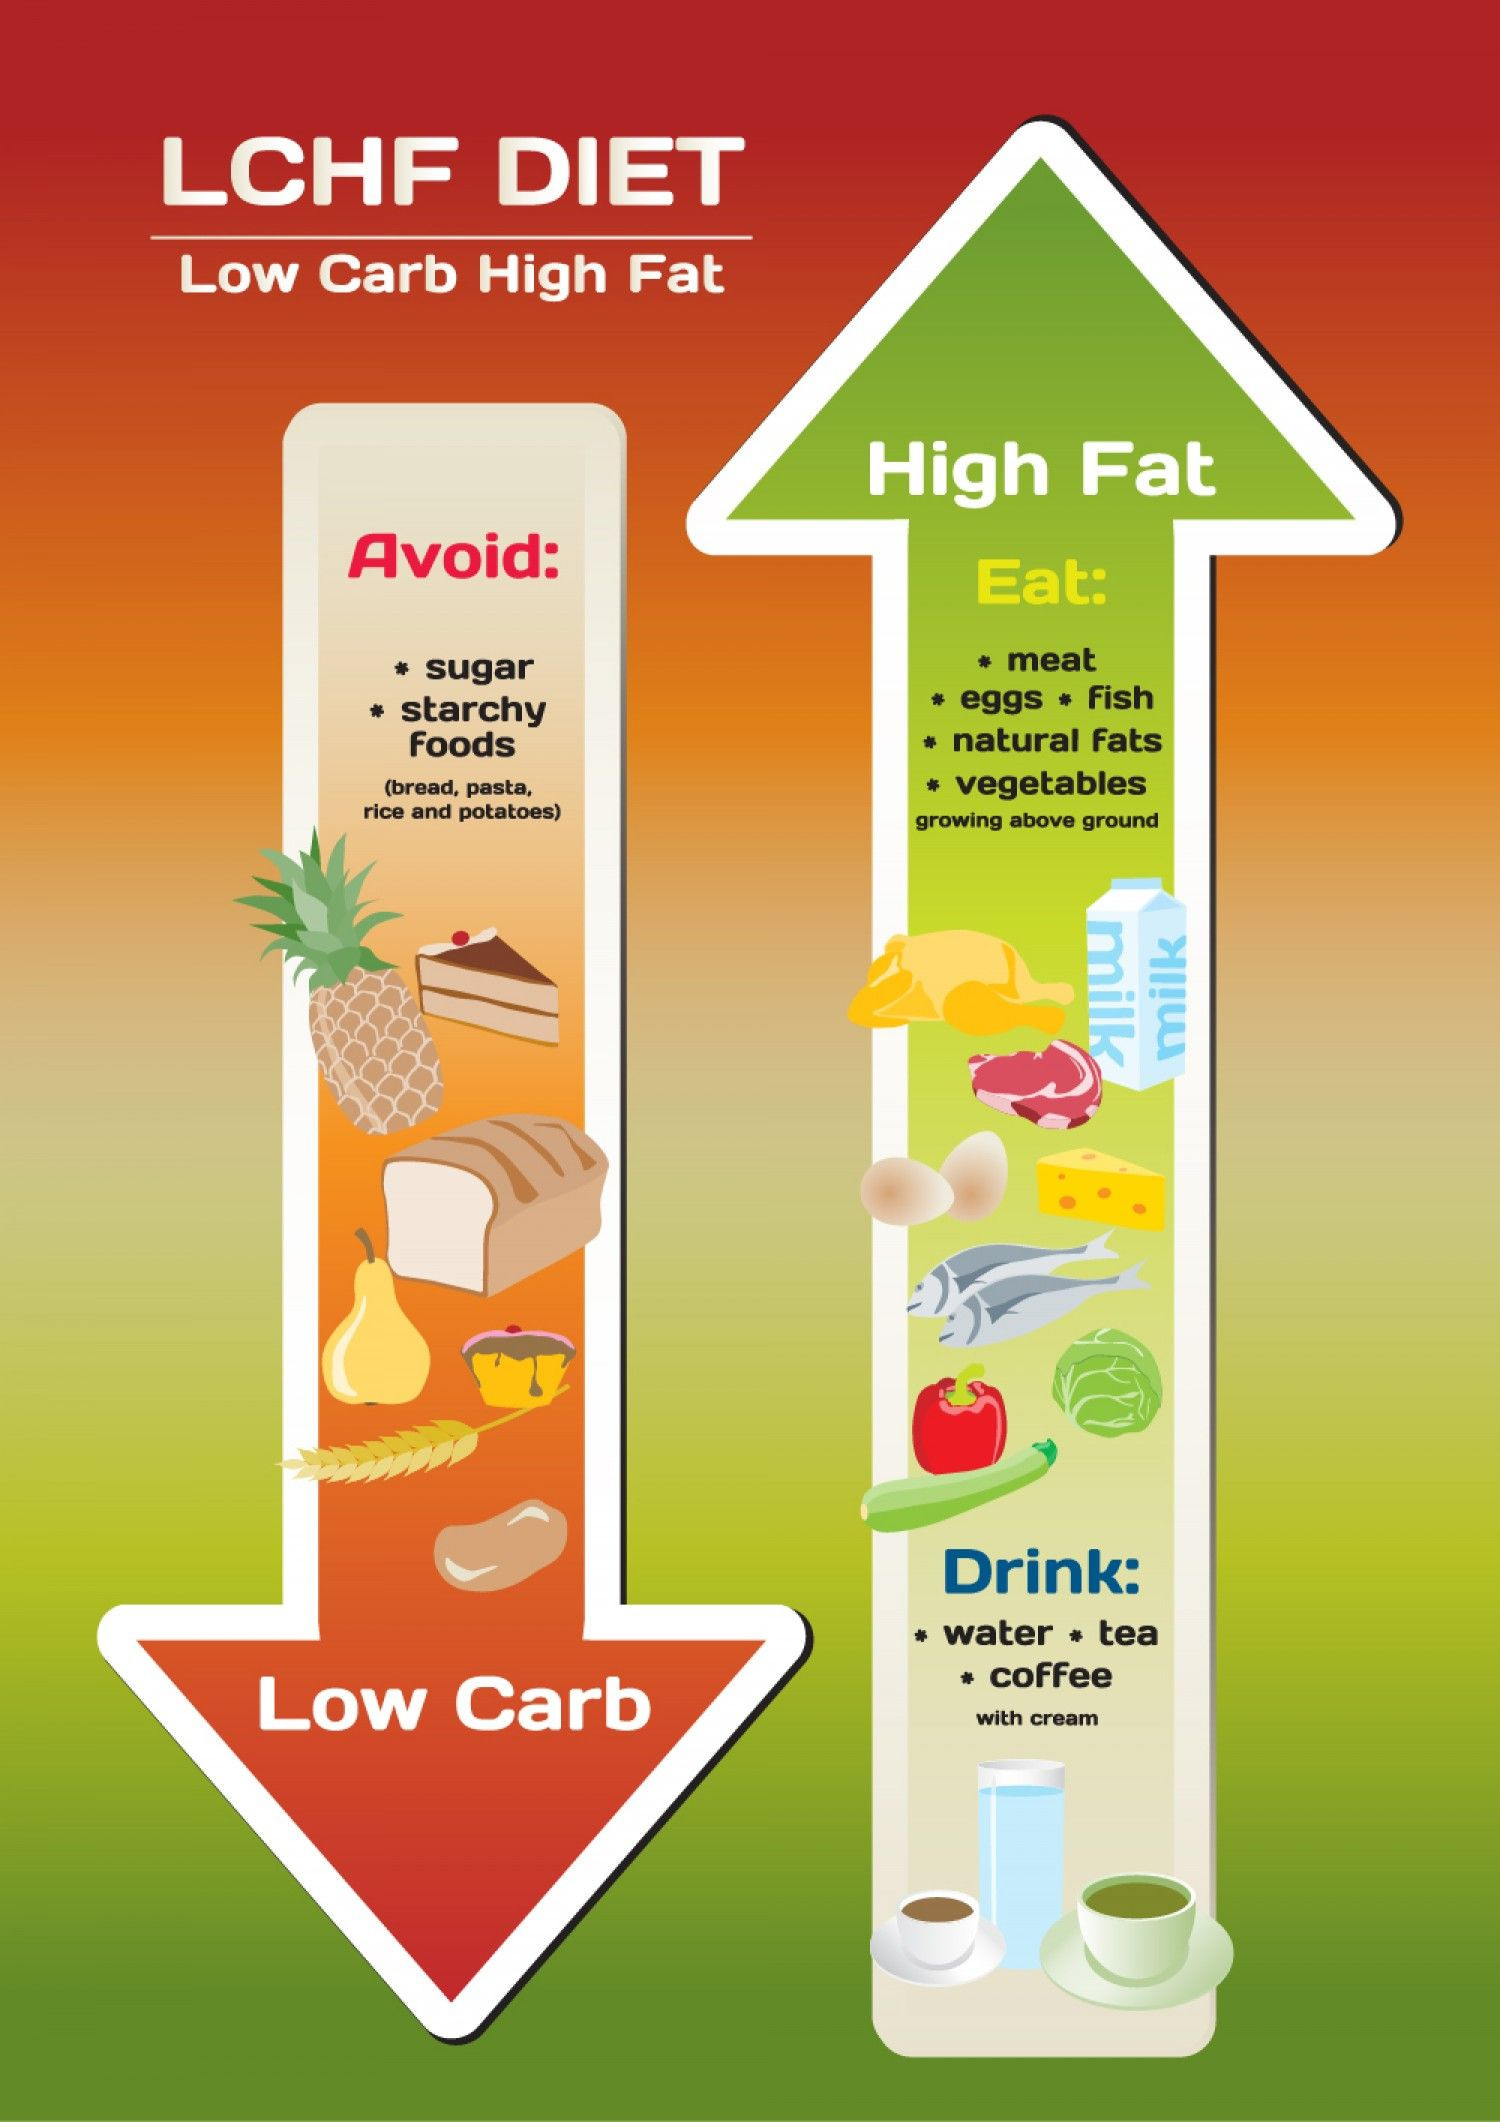 Low Carb High Fat Diet Recipes
 The LCHF Diet Infographic